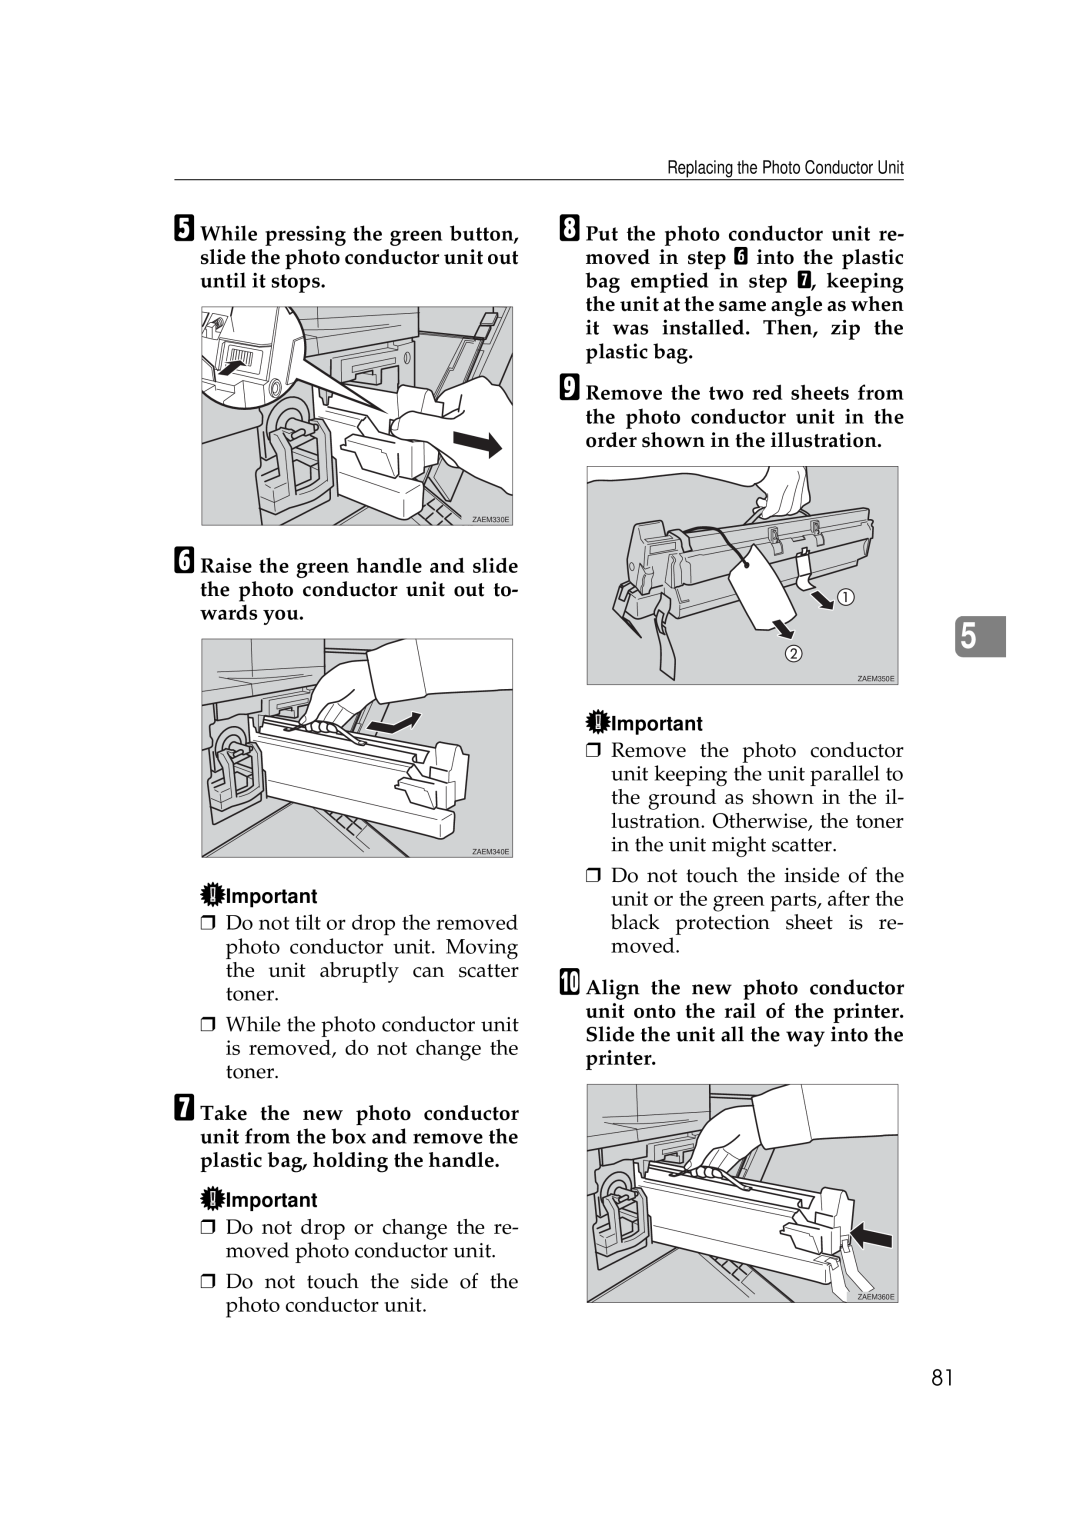 Ricoh Aficio AP2700 operating instructions While the photo conductor unit is removed, do not change the toner 